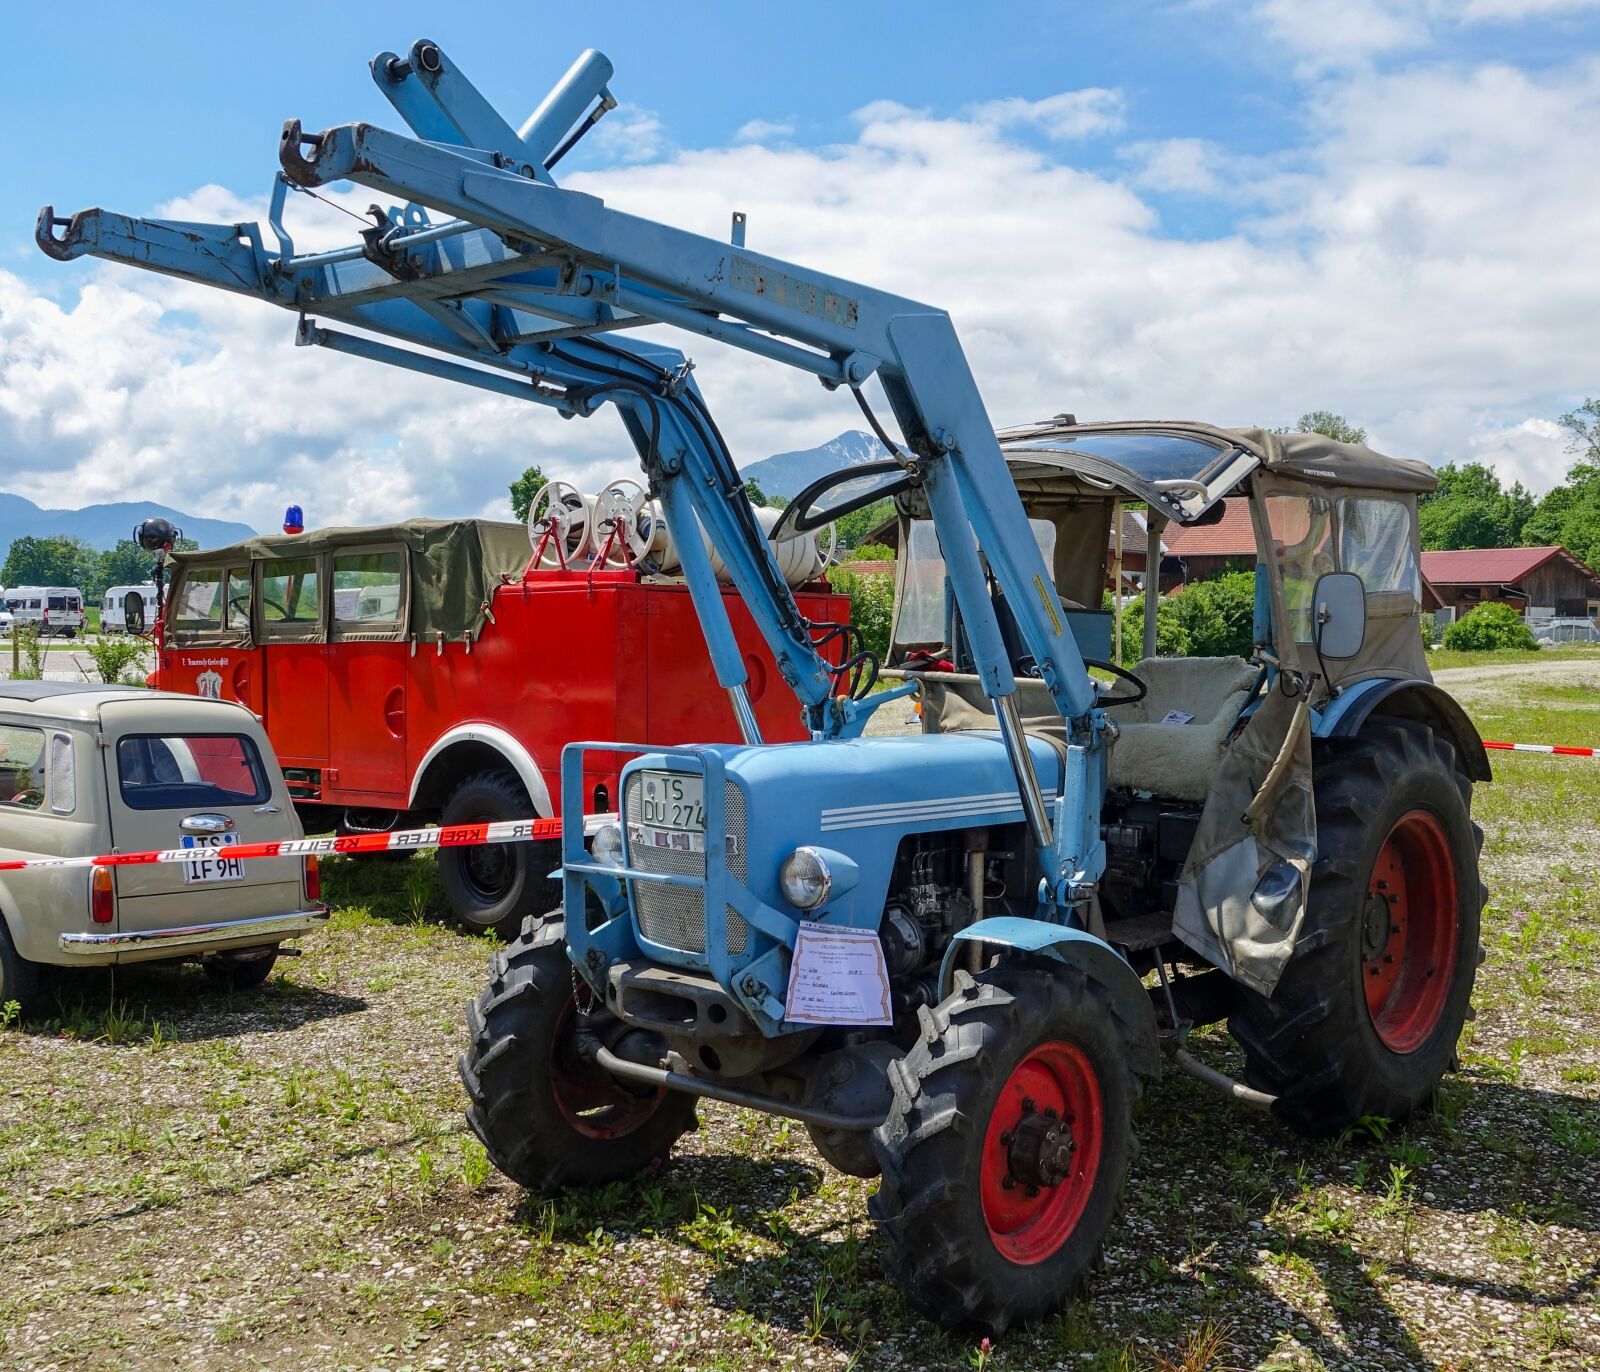 Sony Cyber-shot DSC-RX10 III sample photo. Tractor, bulldog, old tractor photography